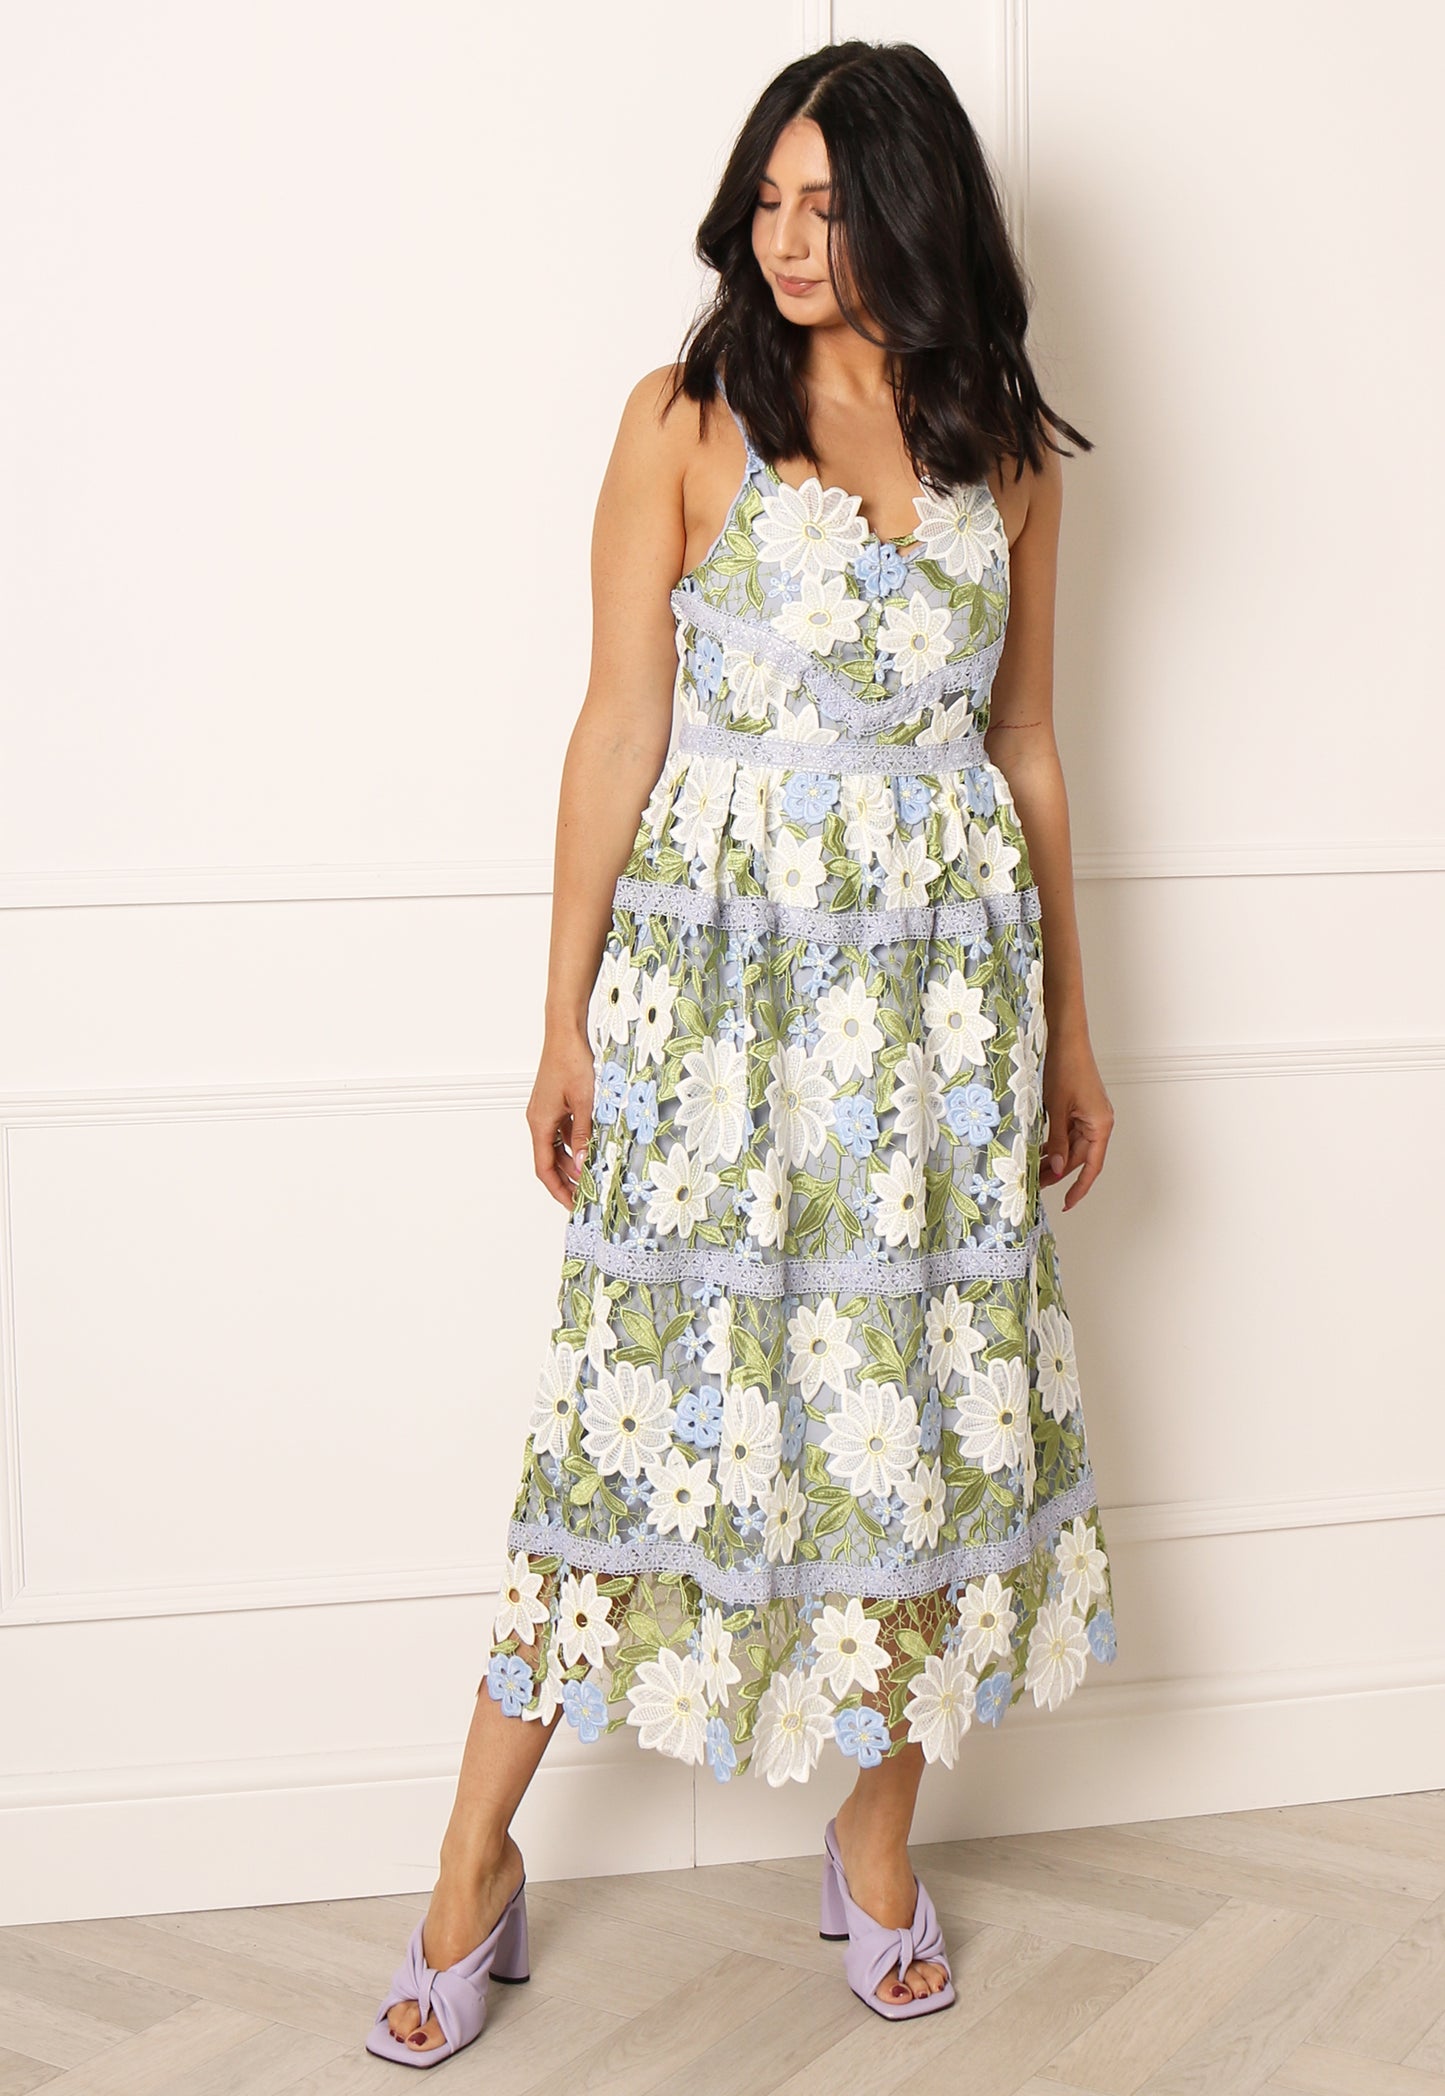 YAS Sun Strappy Floral Lace Appliqué Midi Dress in Blue, White & Green   One Nation Clothing YAS Sun Strappy Floral Lace Appliqué Midi Dress in  Blue, White & Green